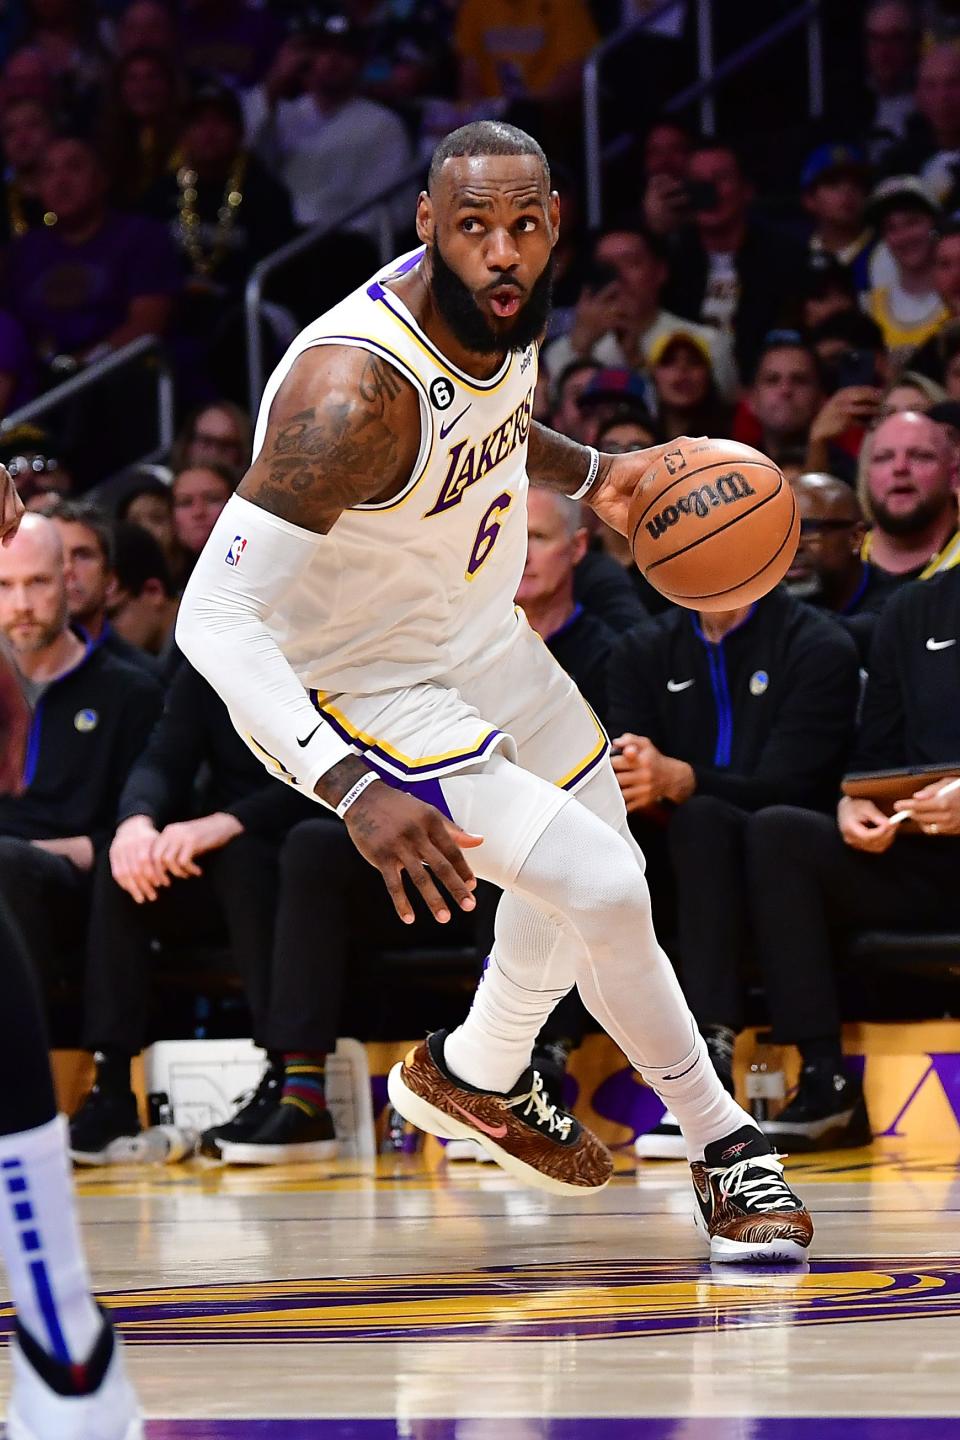 LeBron James started slow but he got going and helped the Lakers to a big Game 3 victory over the Warriors.